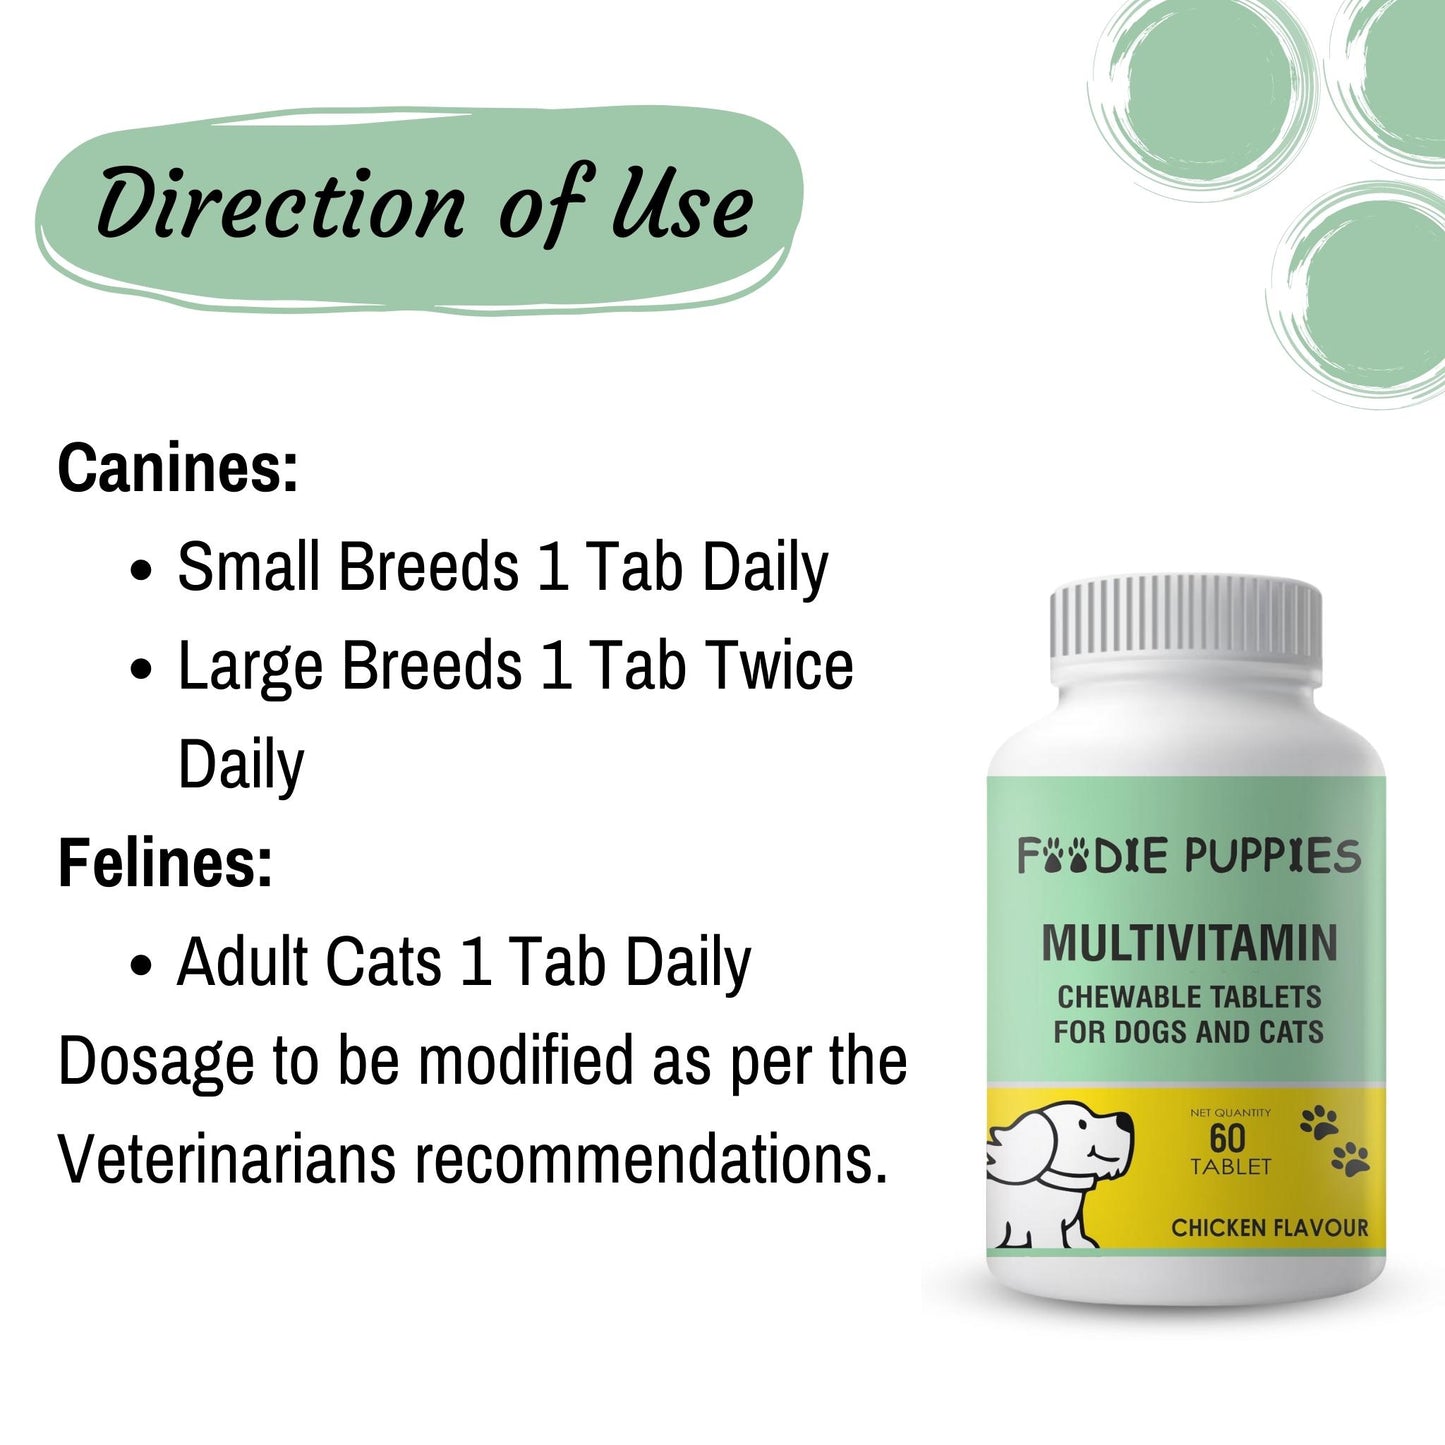 Foodie Puppies Multivitamin 60 Tablets for Dogs & Cats - (Pack of 2)